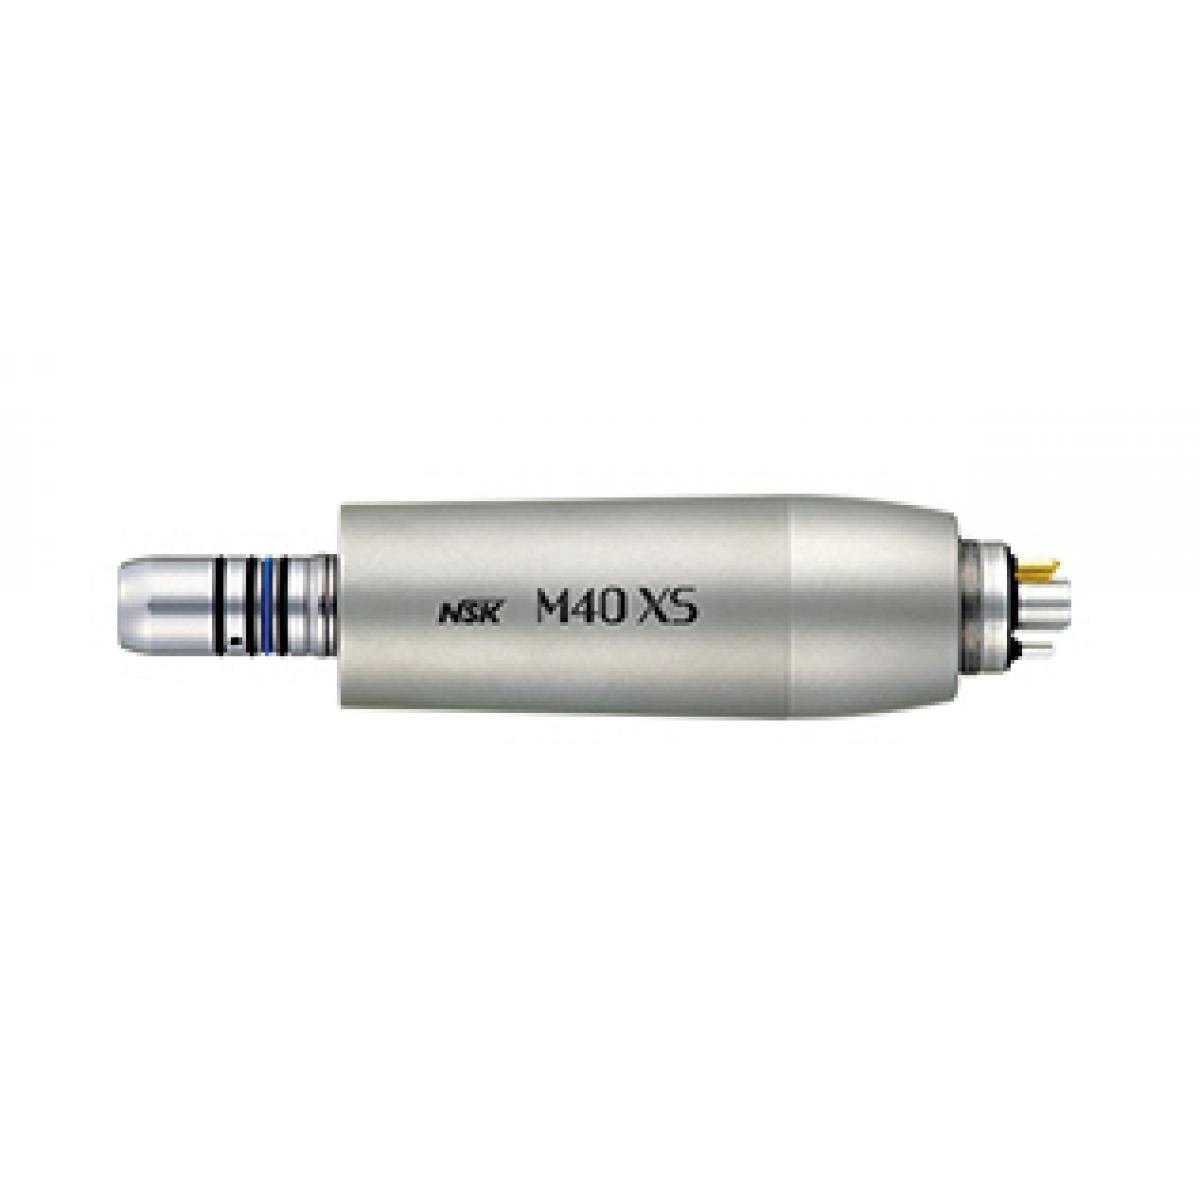 MICROMOTOR ELECTRICO LED M40 XS NSK -